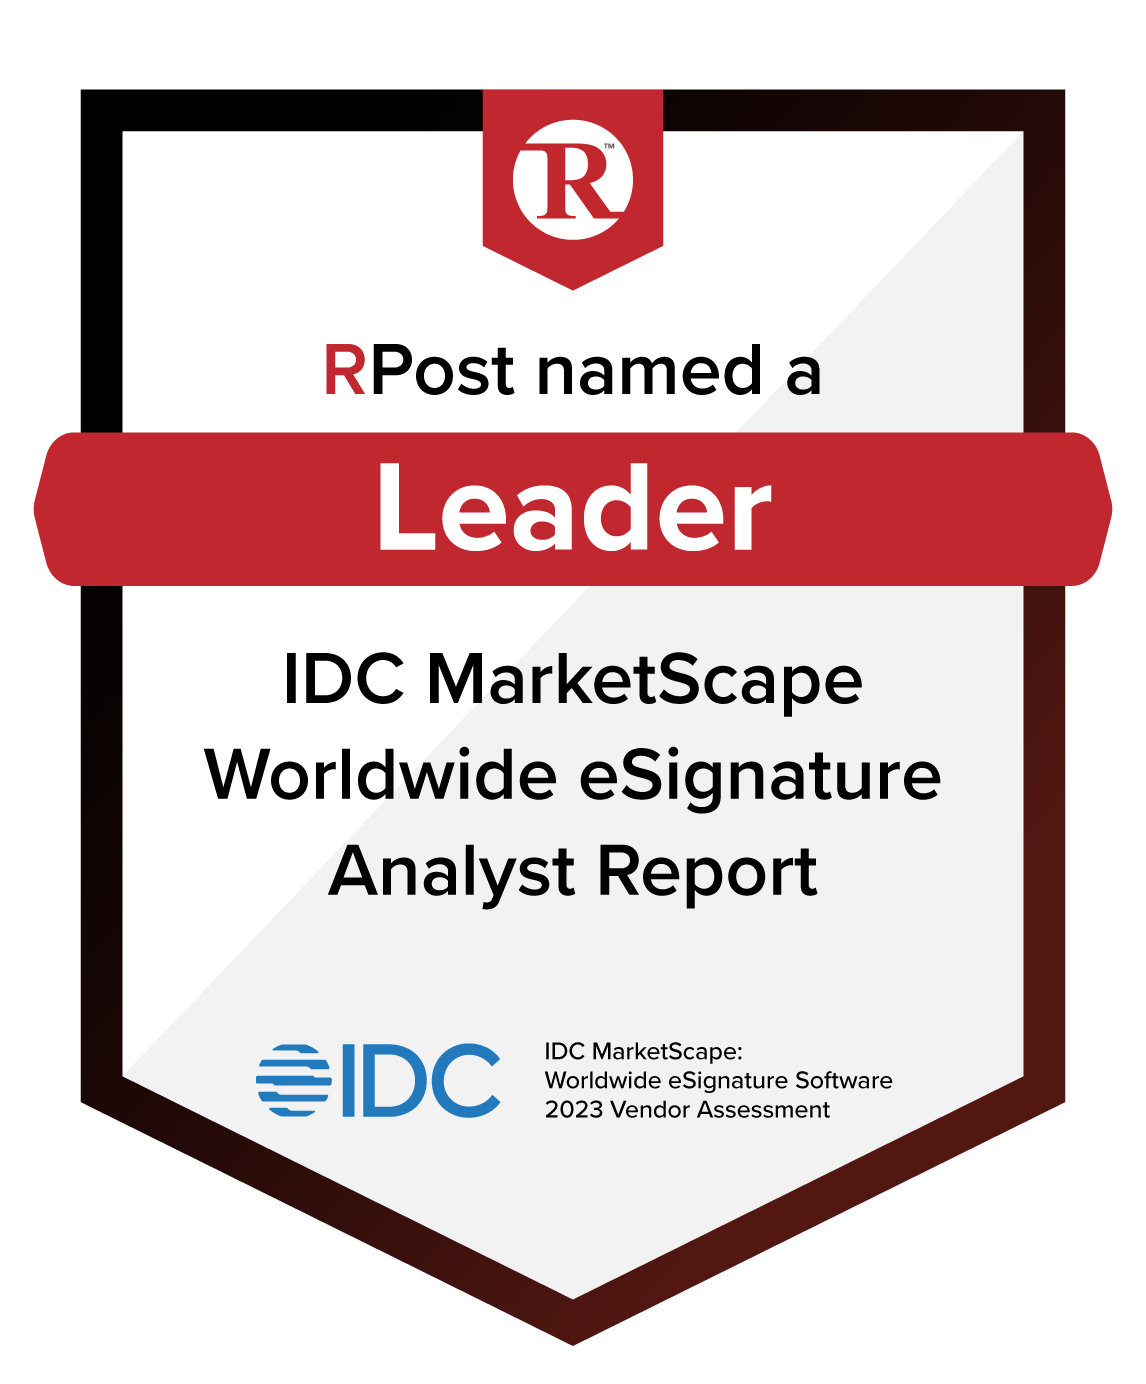 RPost Named a Leader in IDC MarketScape for Worldwide eSignature Software 2023